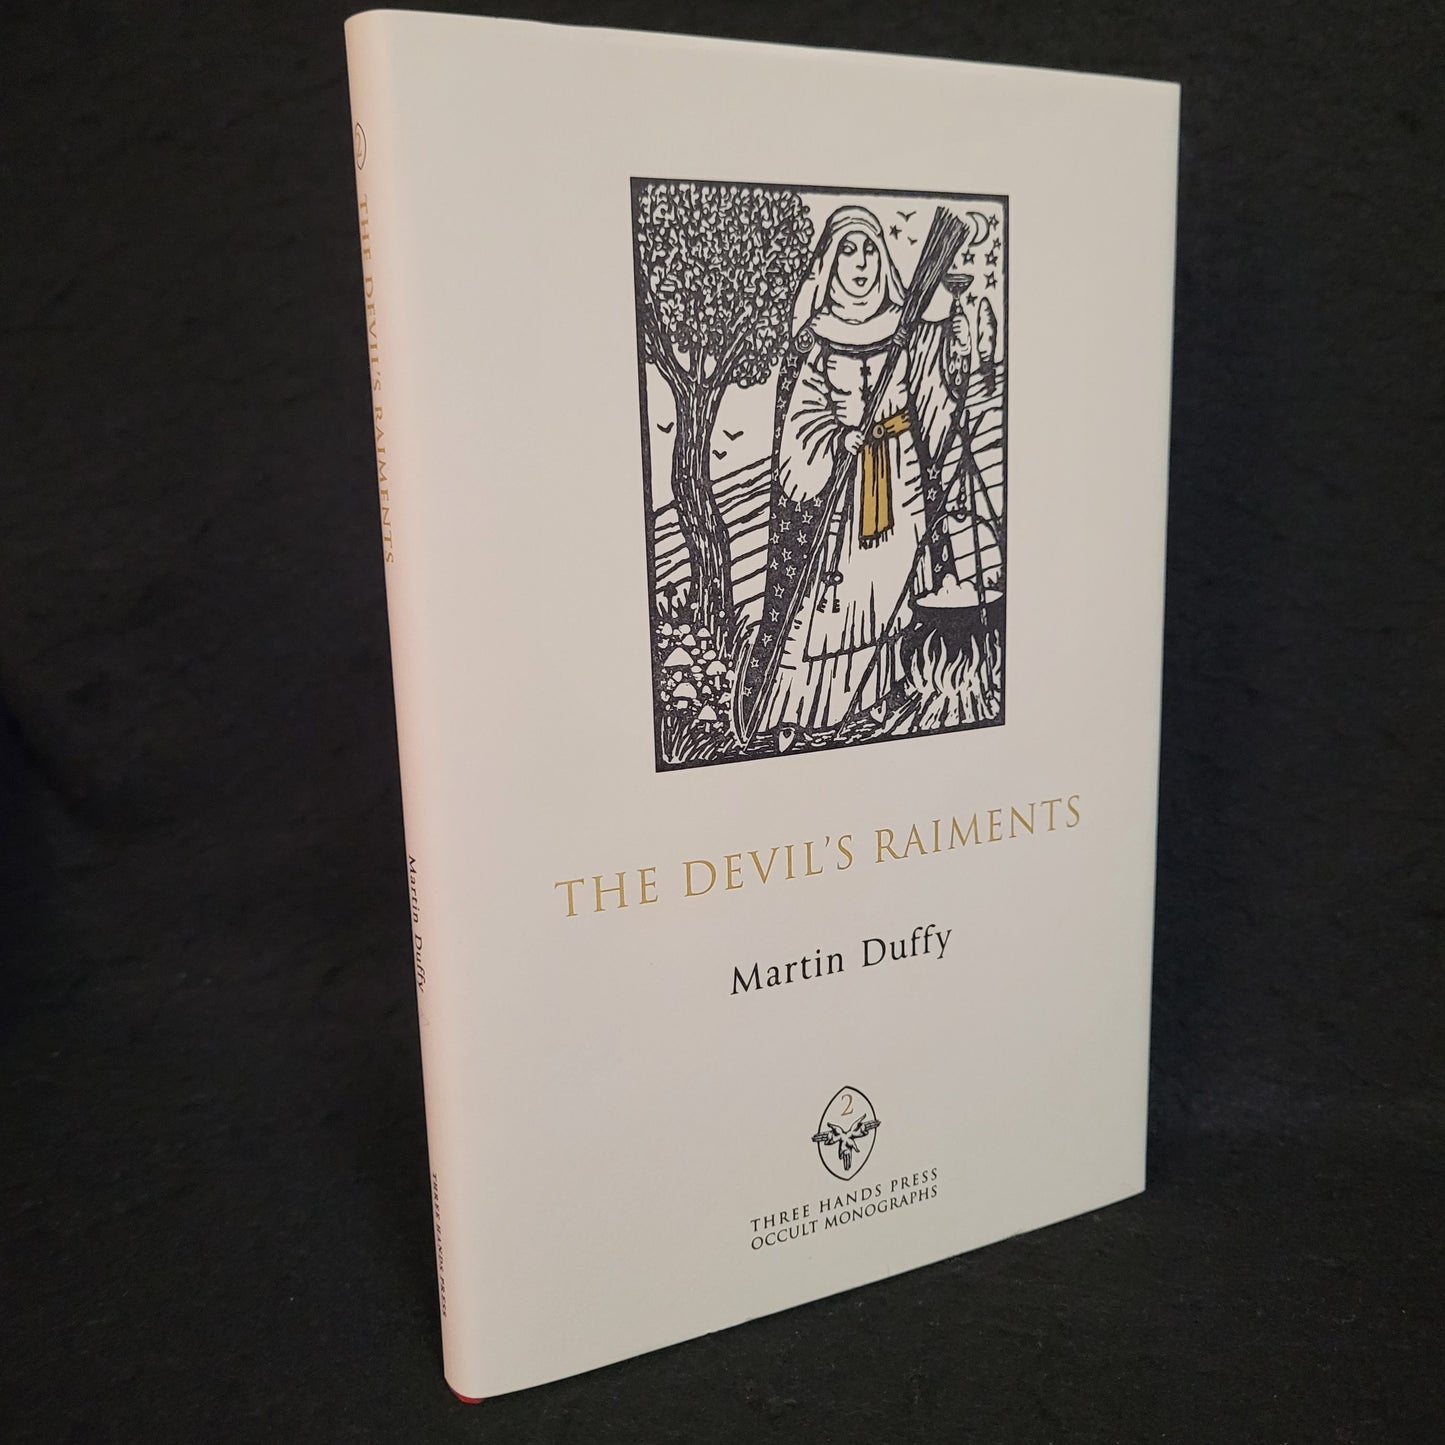 The Devil's Raiments: Habiliments of the Witch's Craft by Martin Duffy (Three Hands Press Occult Monographs, 2012) Hardcover with Dust Jacket